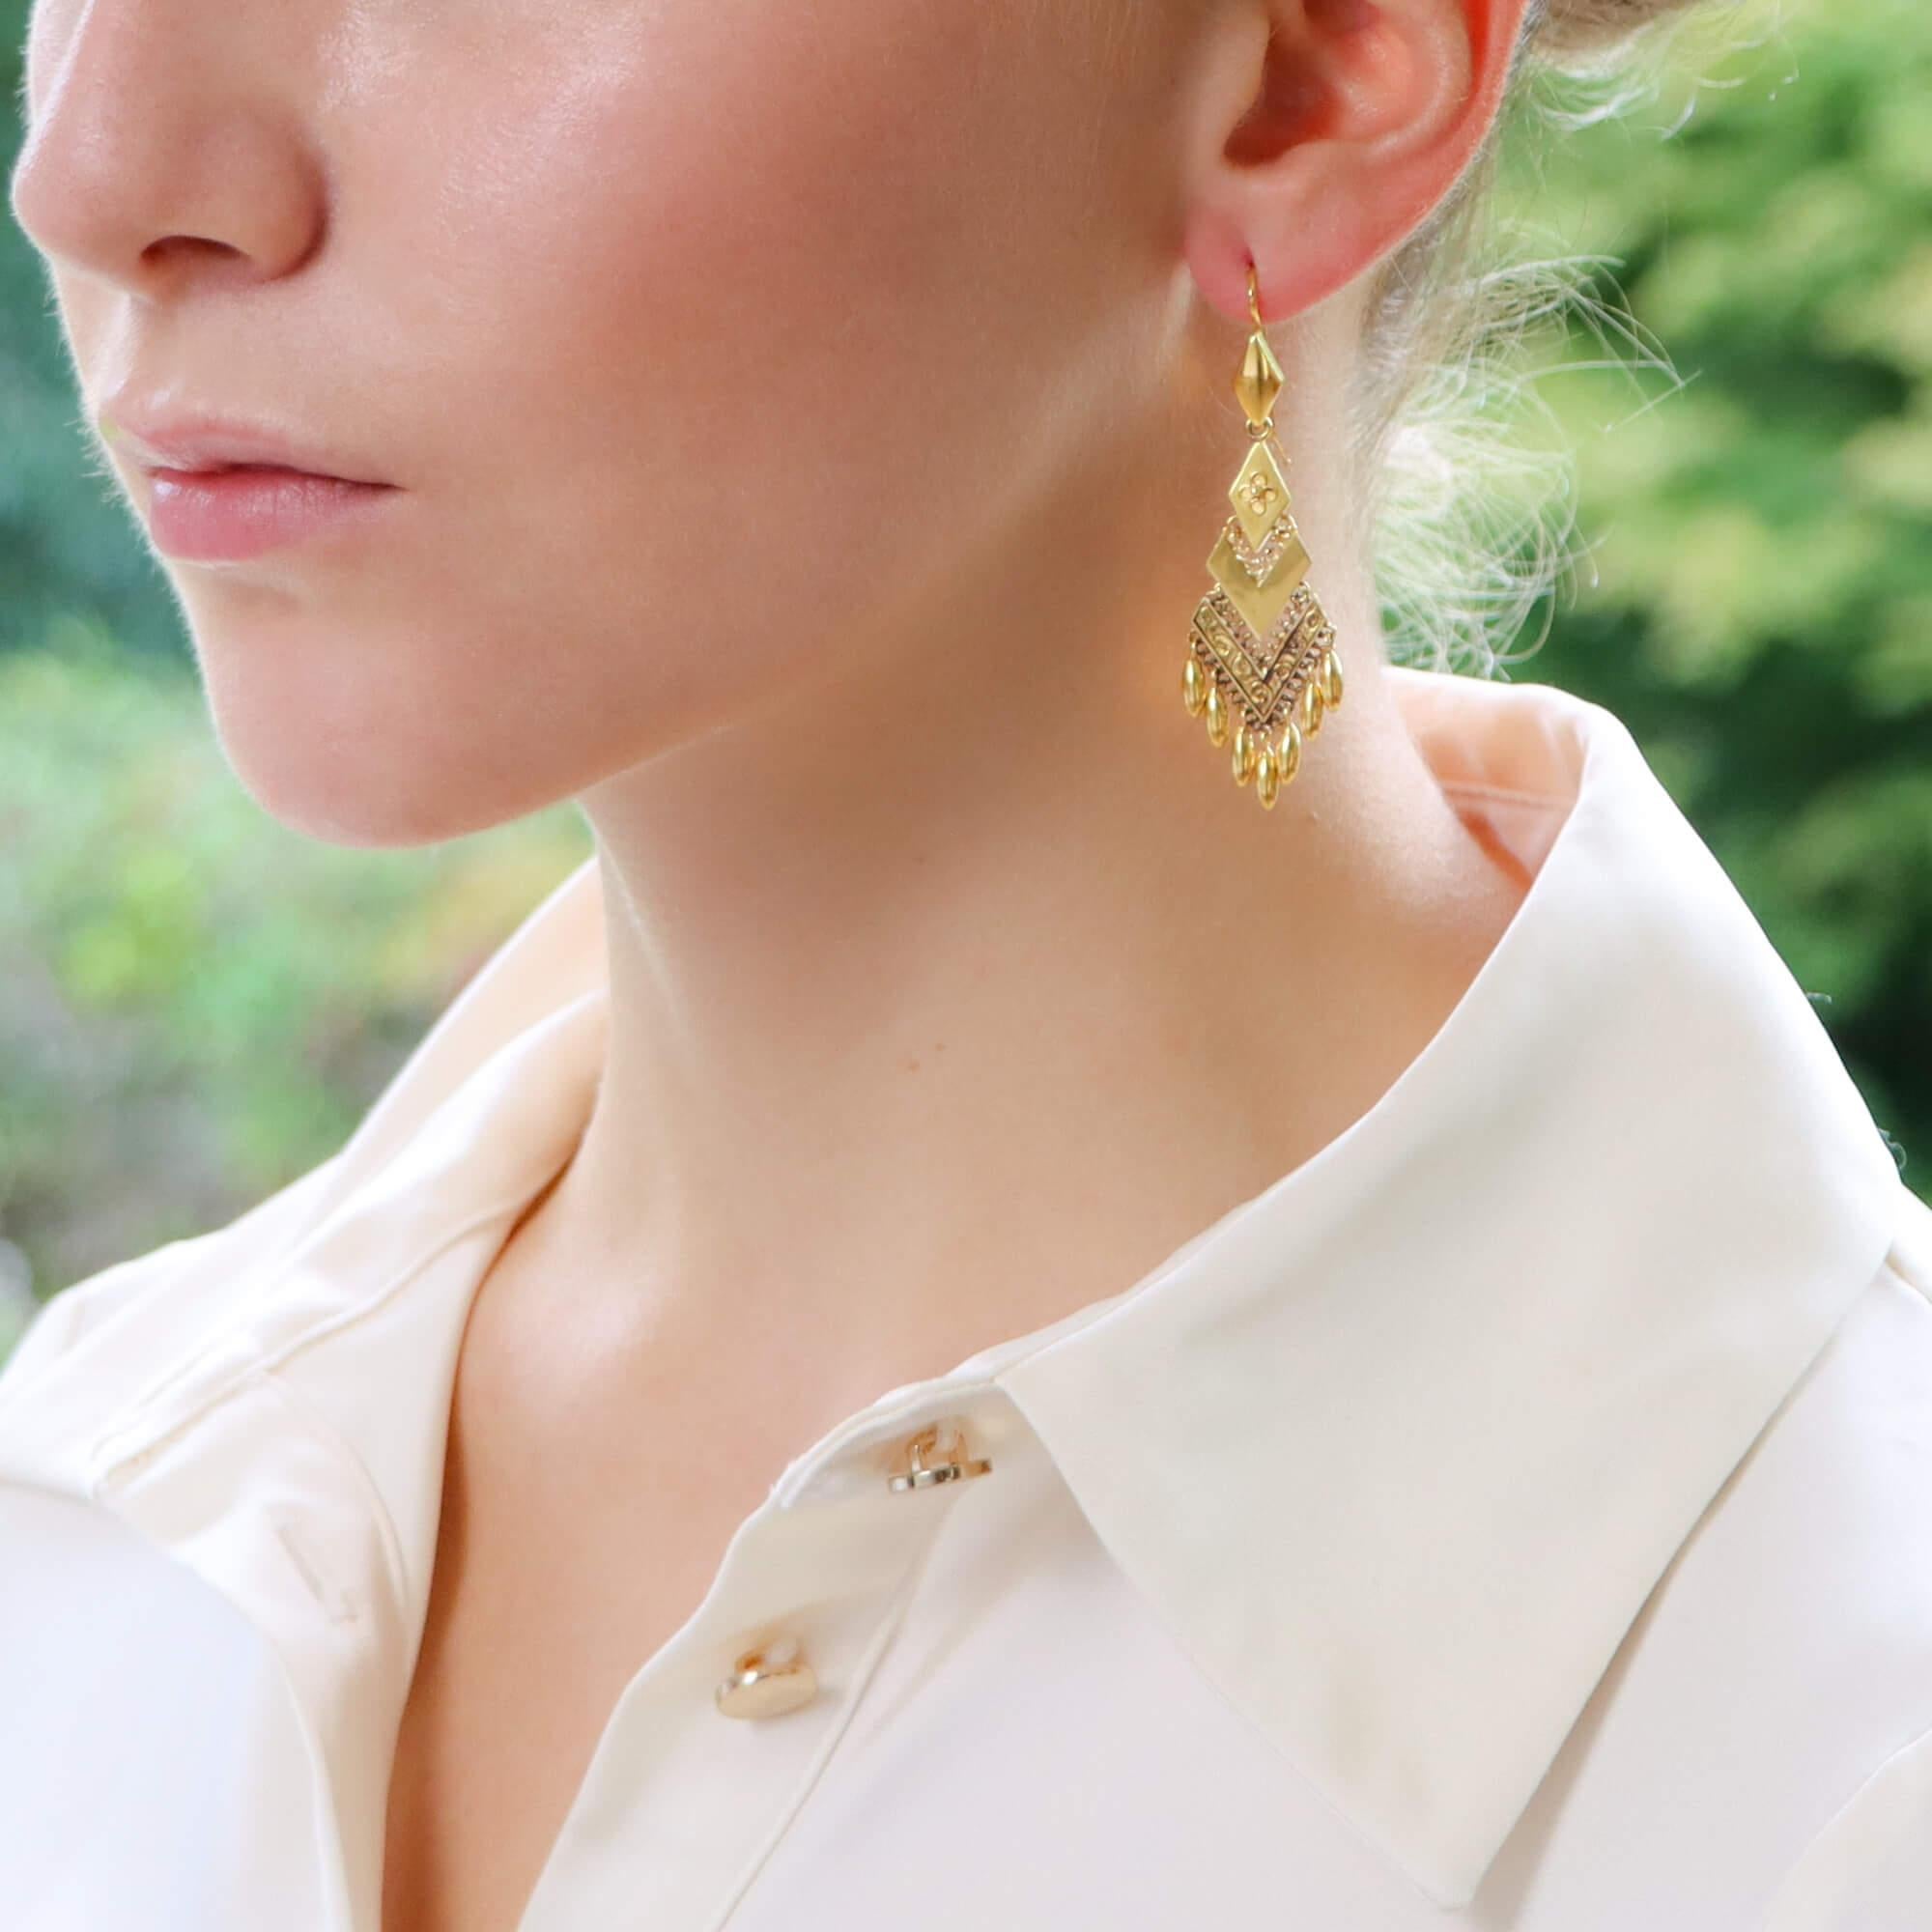 An extremely elegant pair of Victorian Etruscan inspired drop earrings made of solid 18k yellow gold. 

Each earring has been beautifully hand crafted and delicately detailed with intricate gold work. The earrings are articulated throughout which